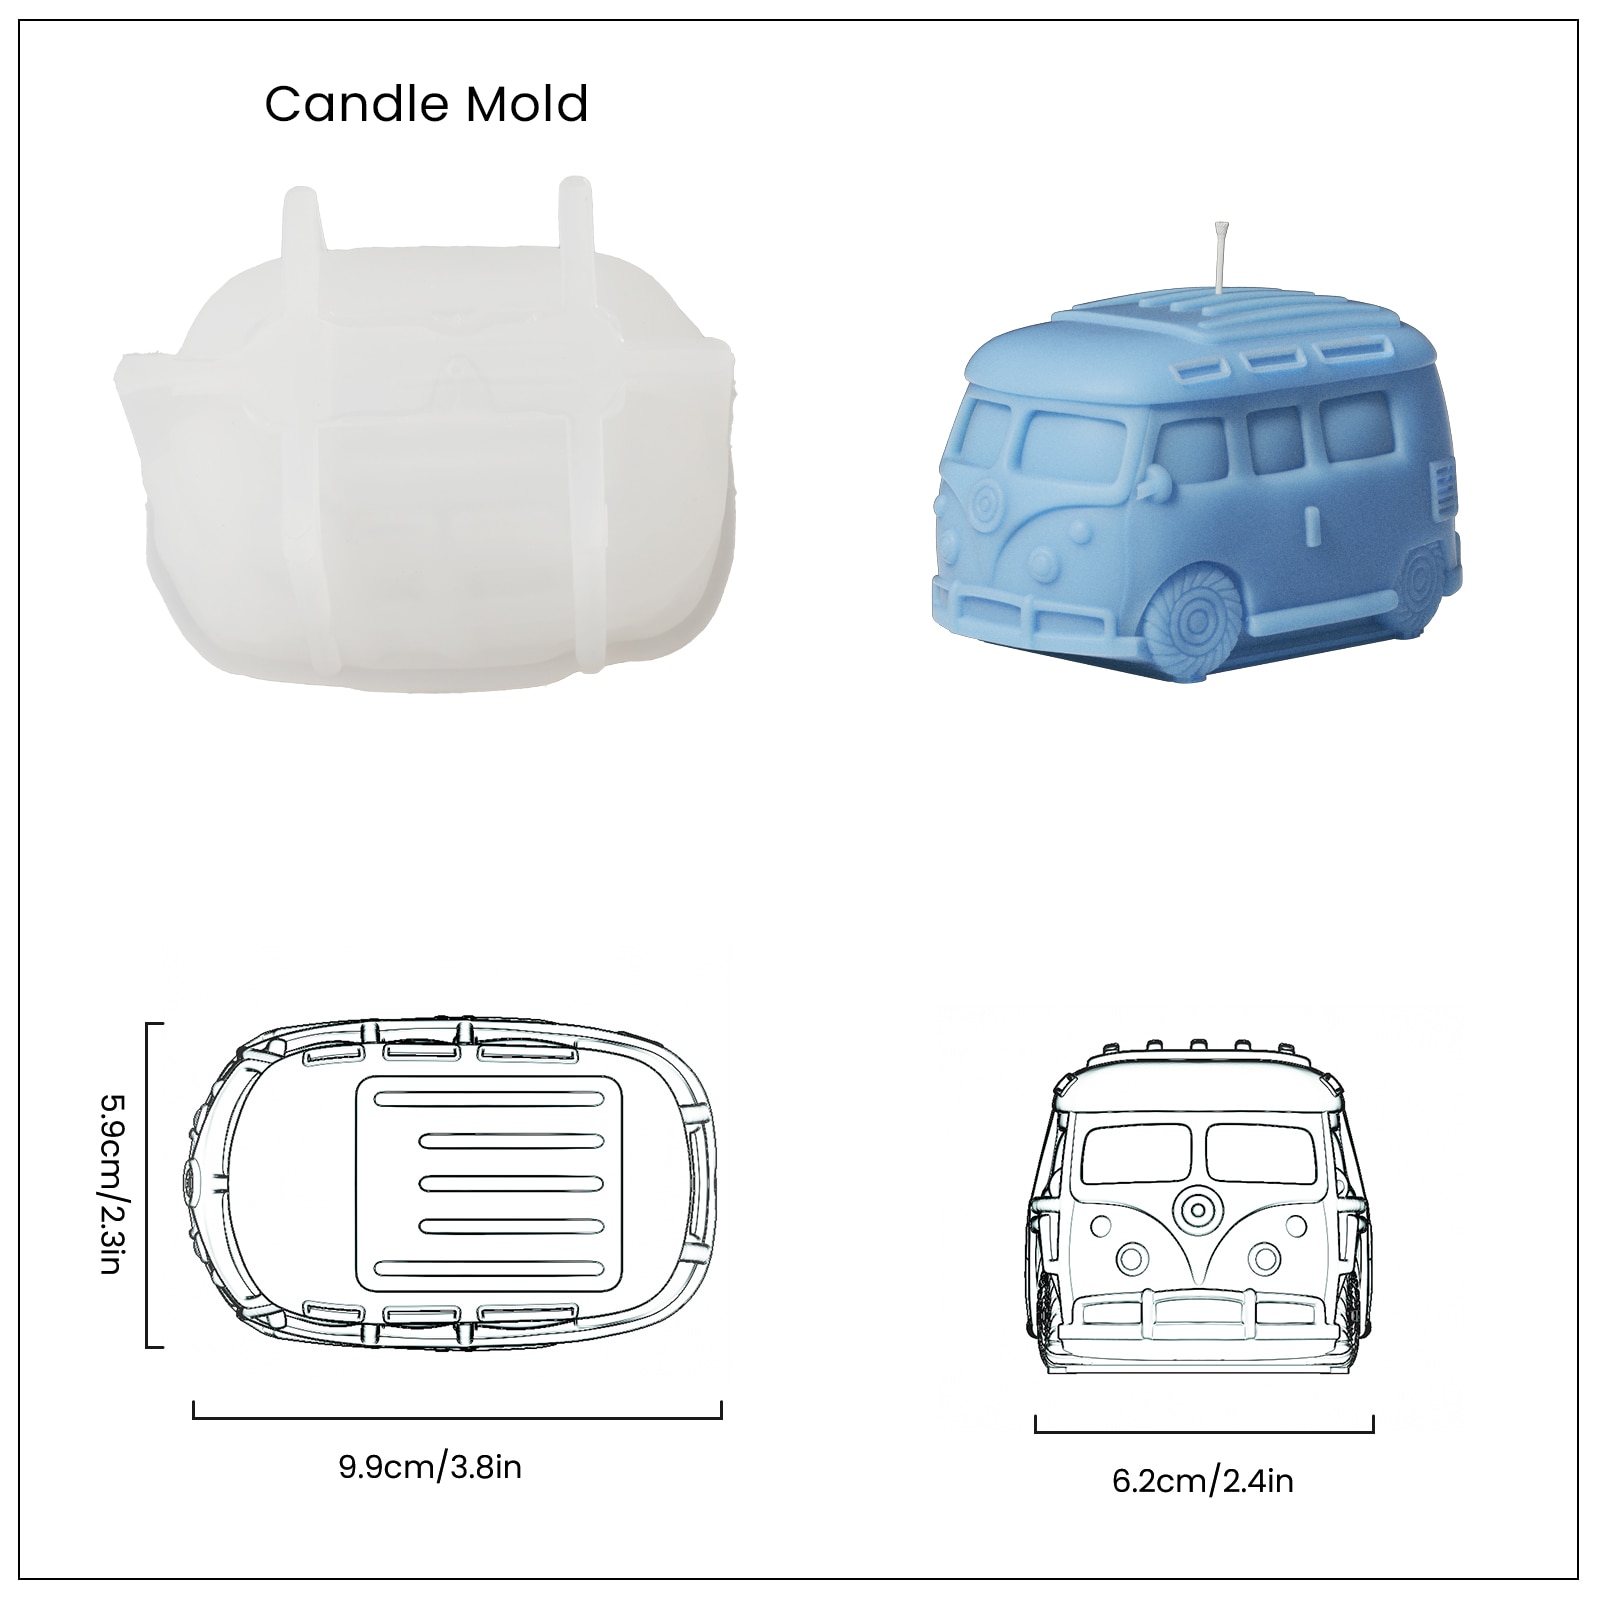 Van Bus Candle Mold Retro Italian Vintage Car Candle Making Handmade Home Decorative Ornament Silicone Mold